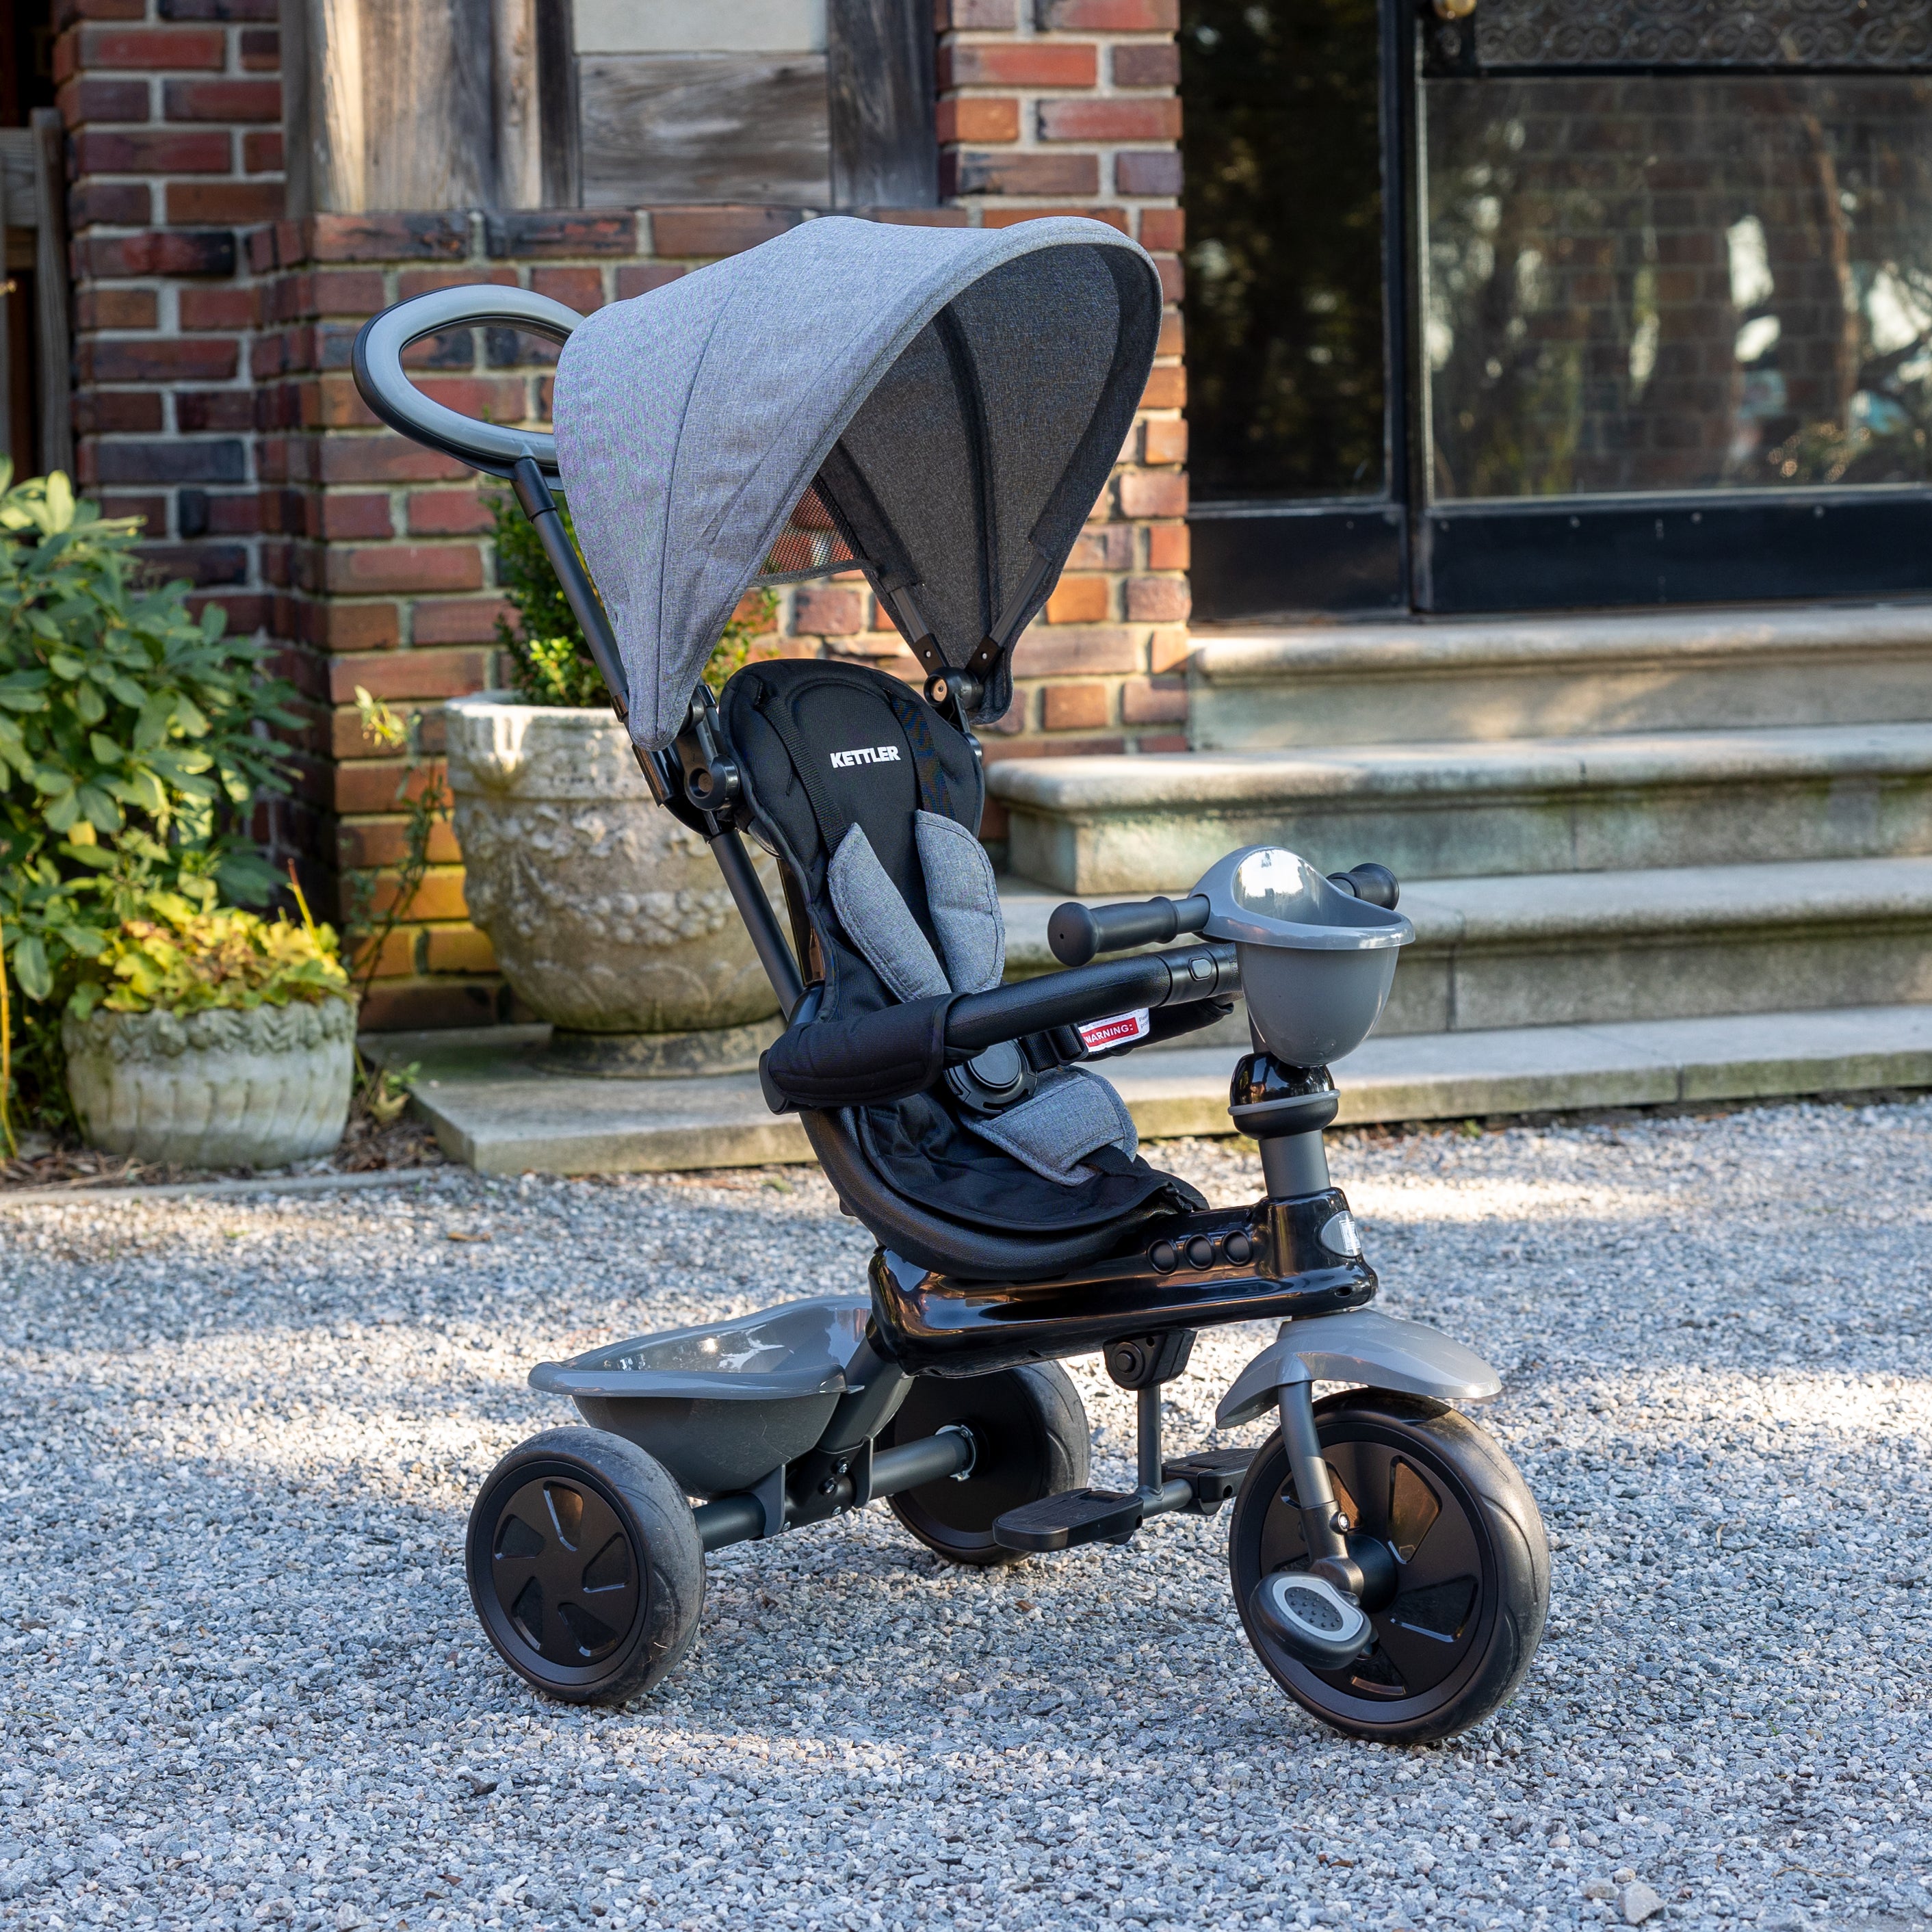 The KETTLER Happy Navigator 4-in-1 Trike grows with your little one from 10 to 72 months, transforming from parent-controlled ride on to kids’ tricycle. Unique removable and adjustable features make sure your little one has a trike for every stage of their development.